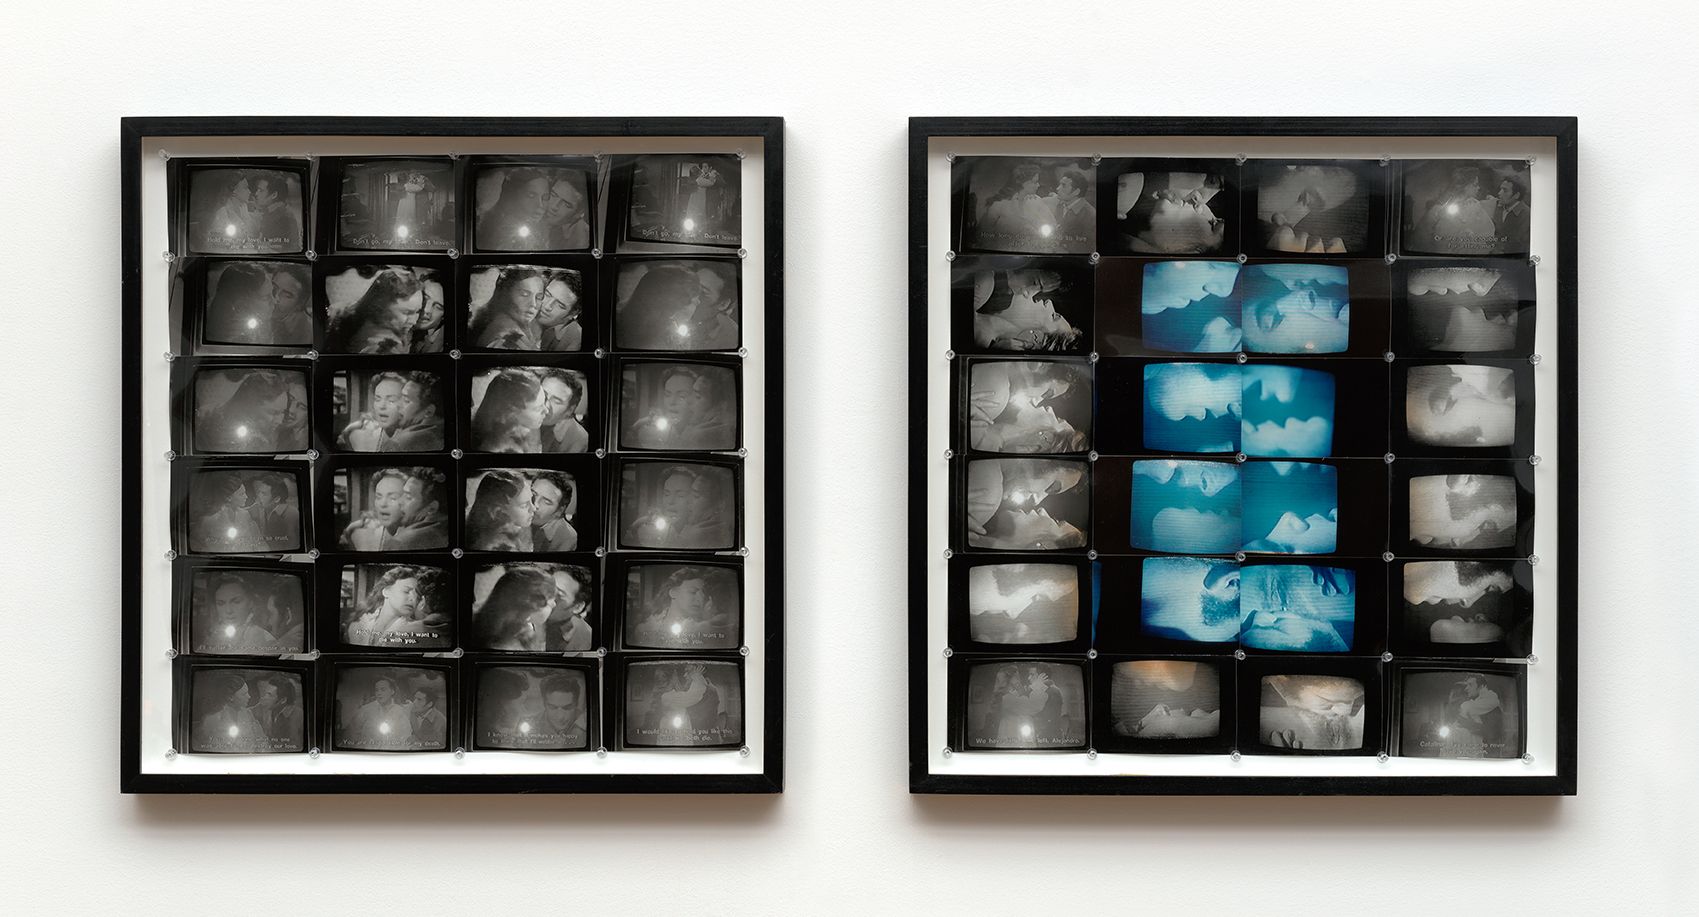 Ellen Cantor, Starry night / cloudy day, 1995, photo collage, diptych, framed, 27 x 26 1/2 in. each, unique, EC_FP3563